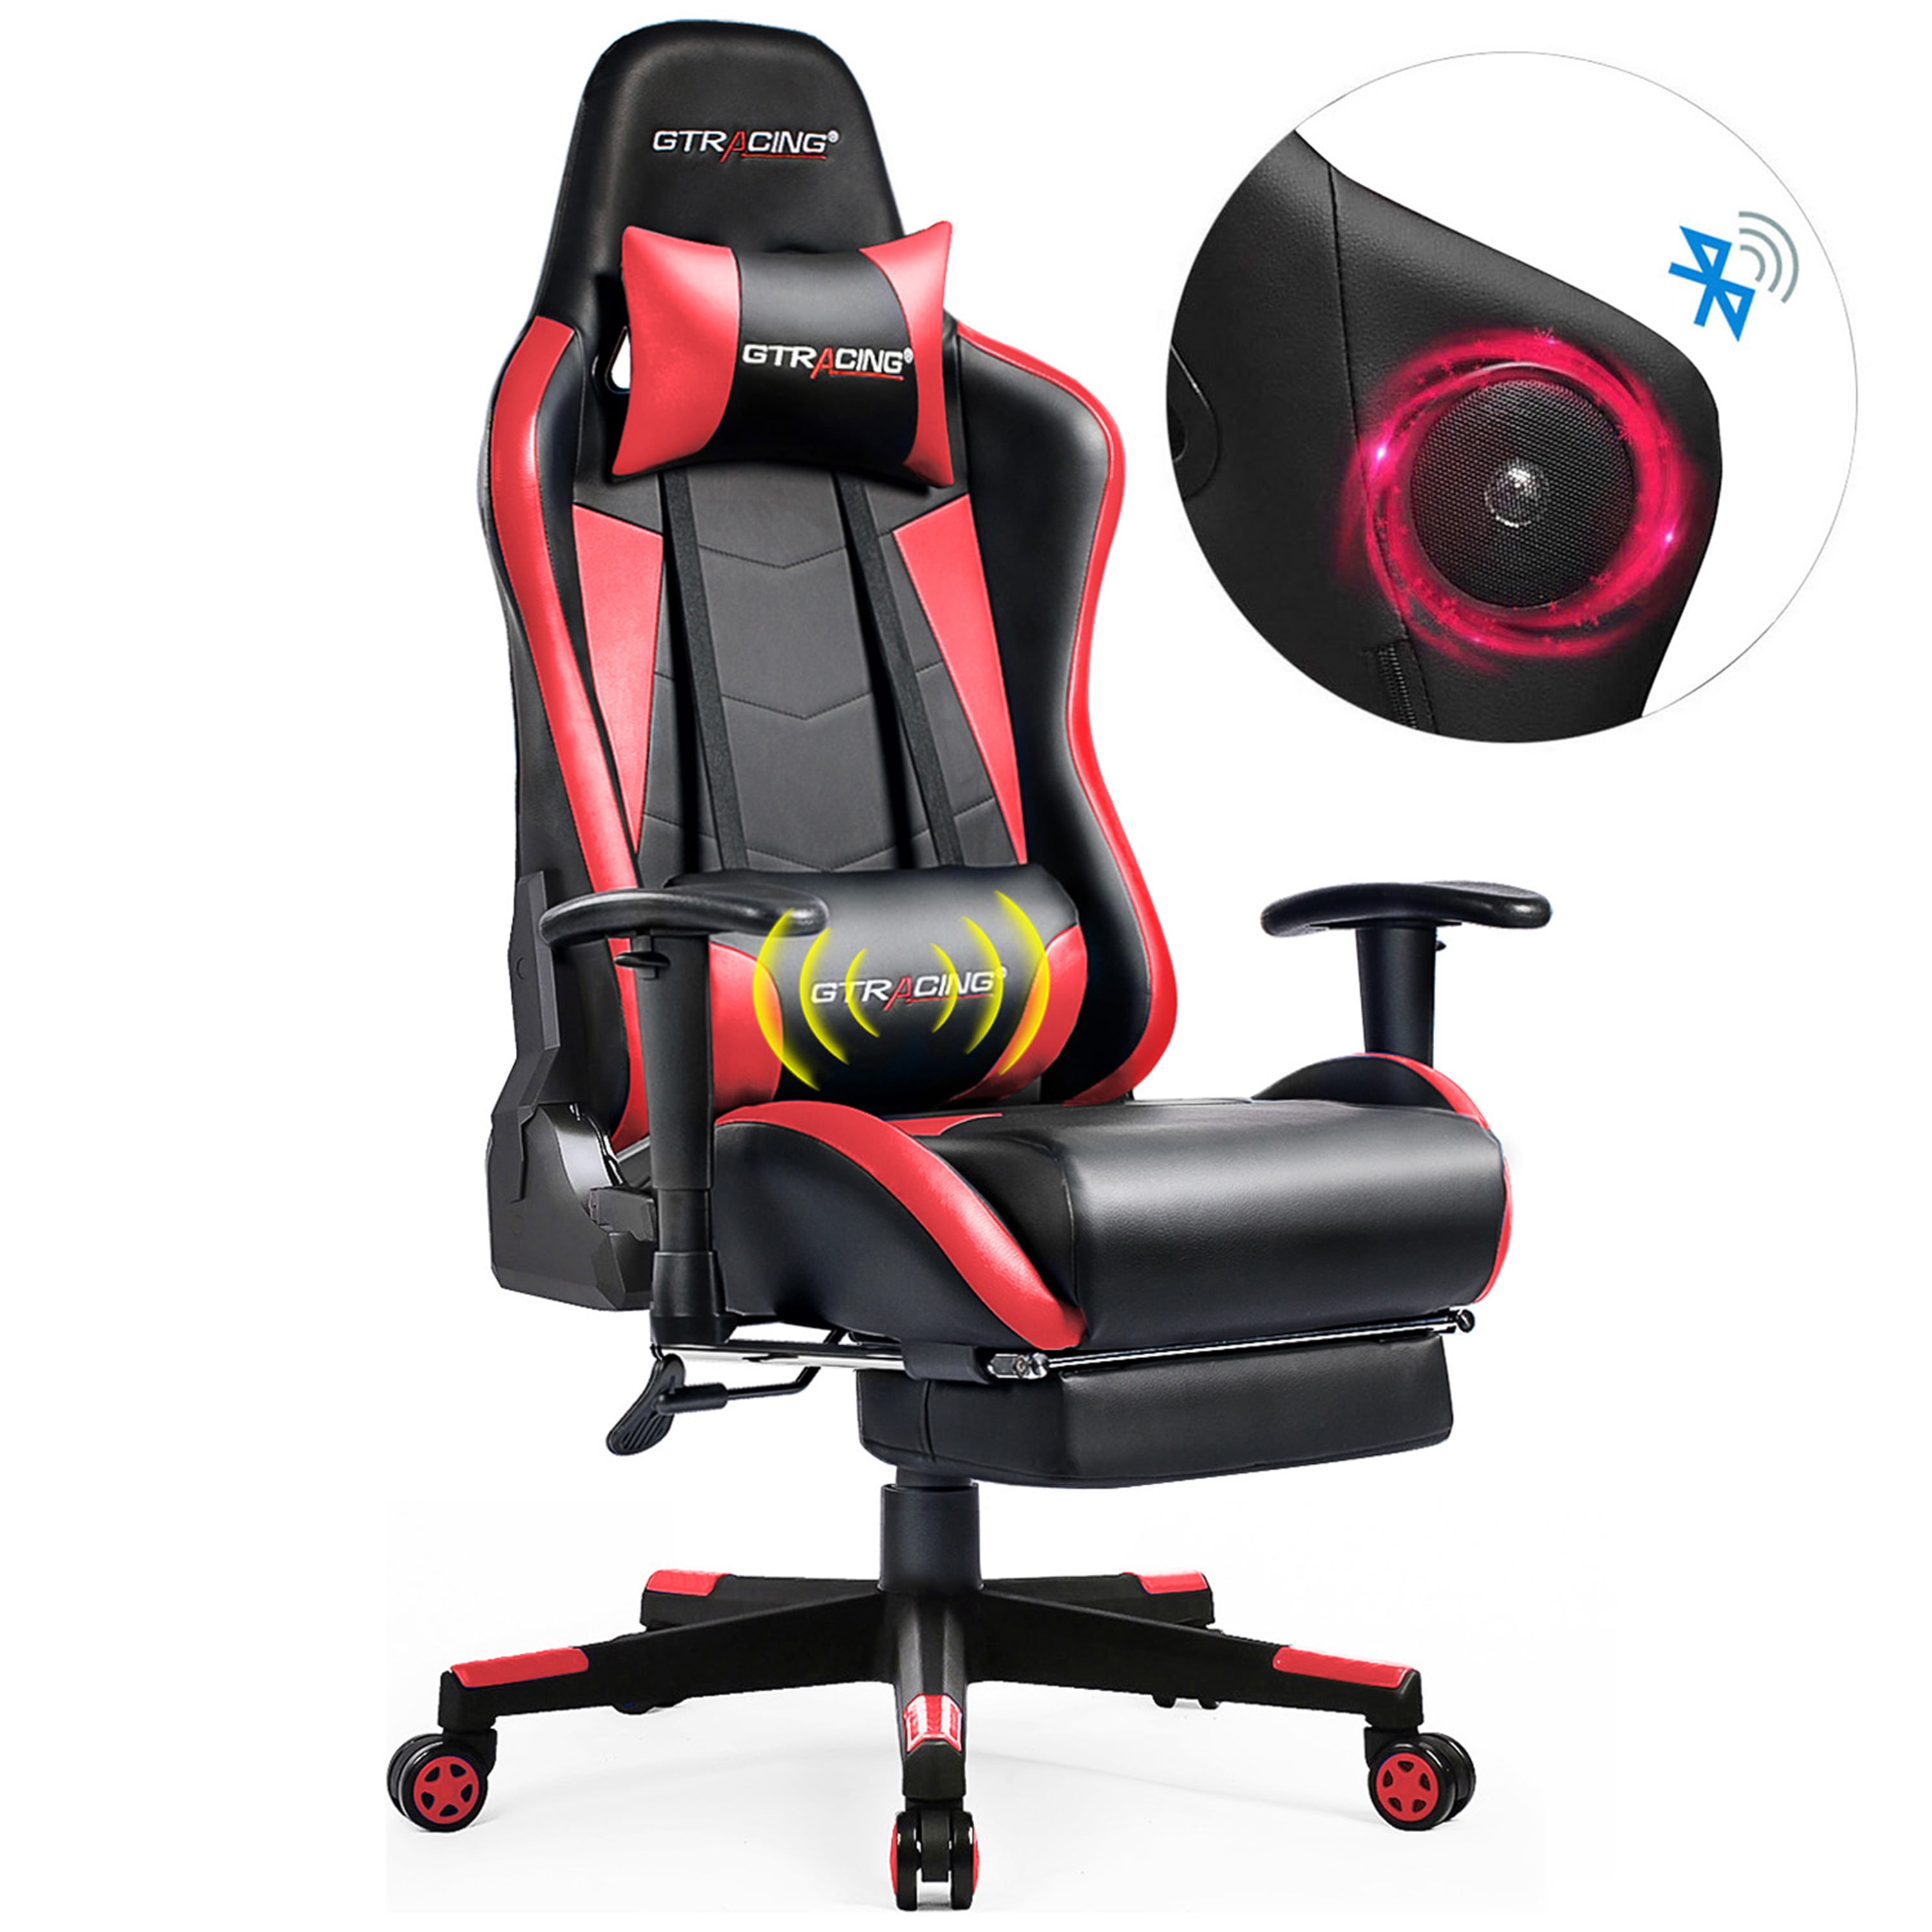 Gtracing Gaming Chair With Bluetooth Speakers Footrest Massage Music Game Chair Black Walmart Com Walmart Com